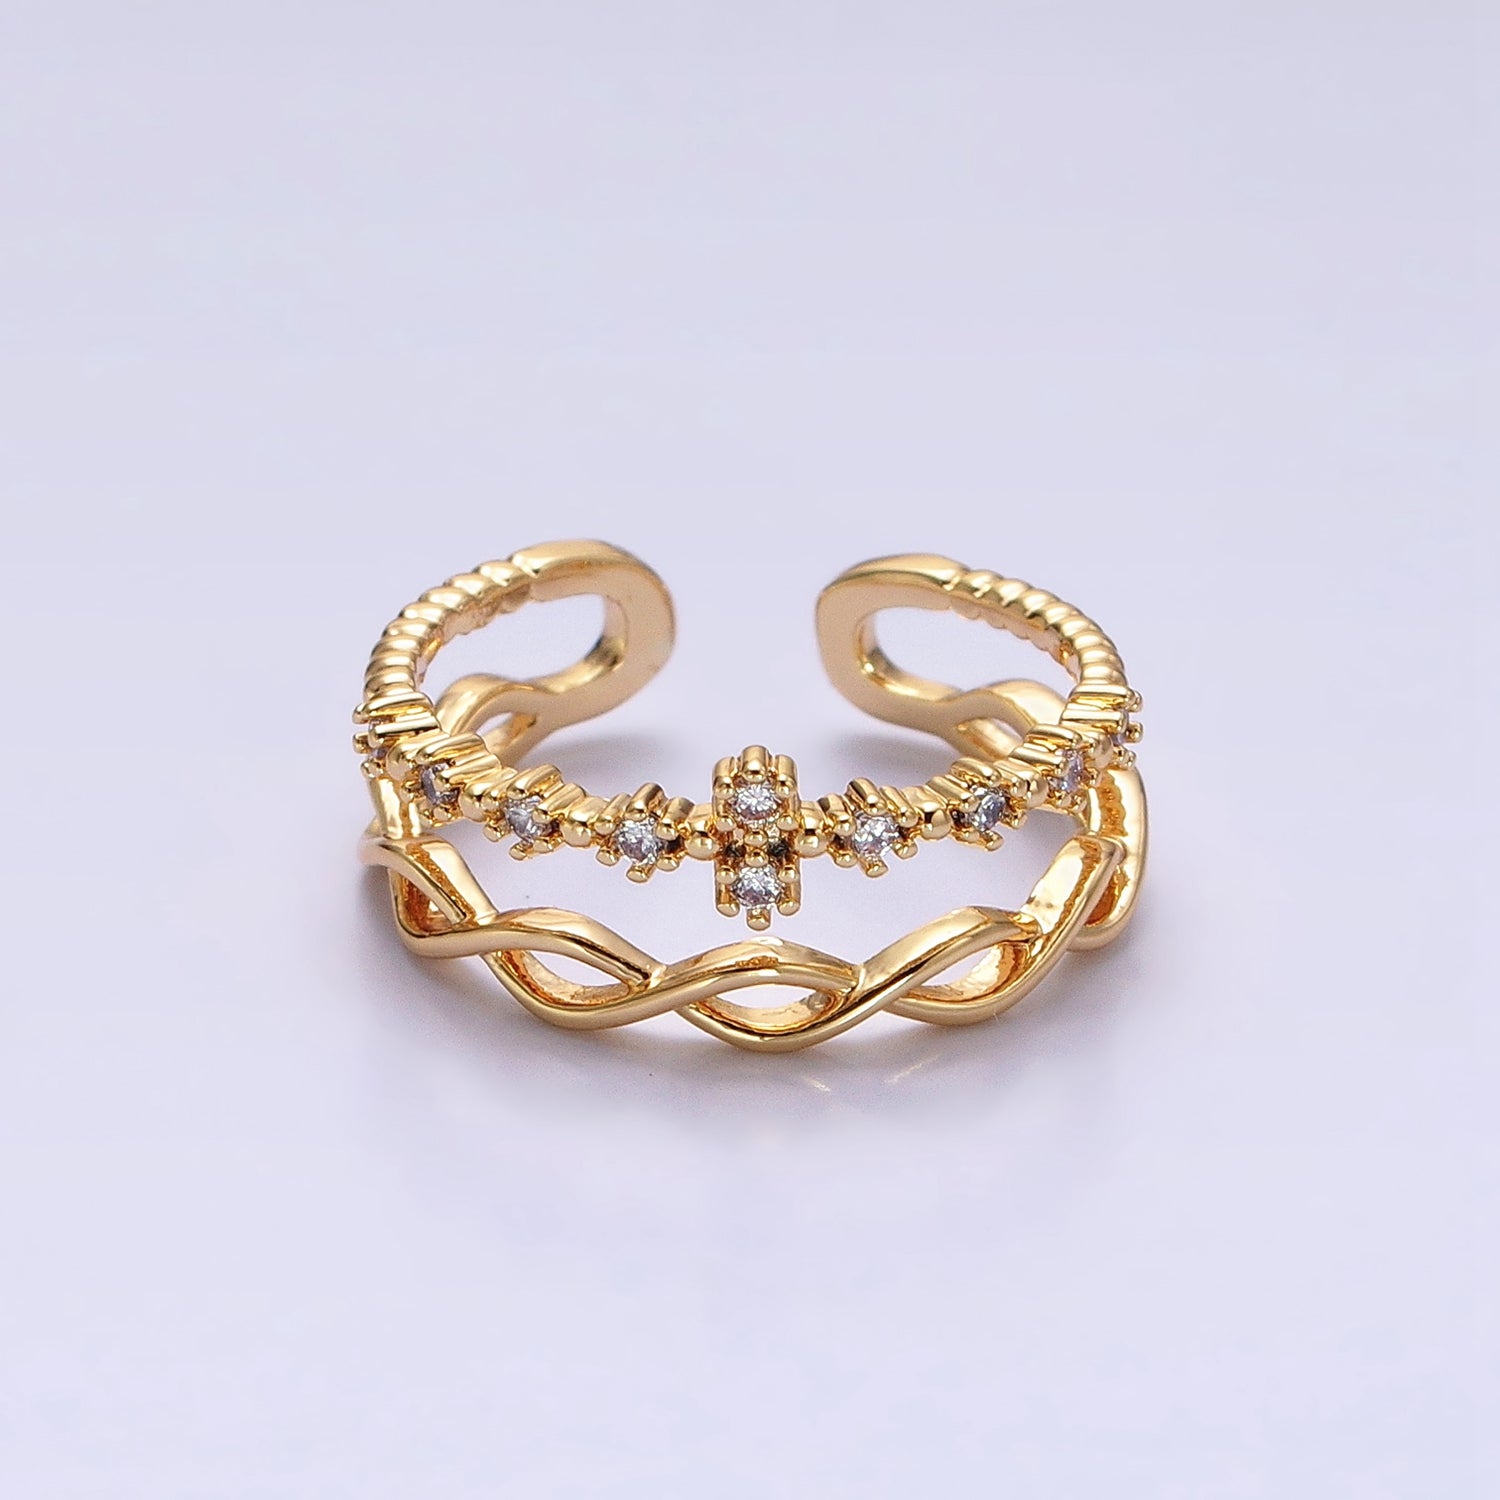 Double Band Ring Gold Twist Knot Band Open Adjustable Ring AA1262 AA1263 - DLUXCA